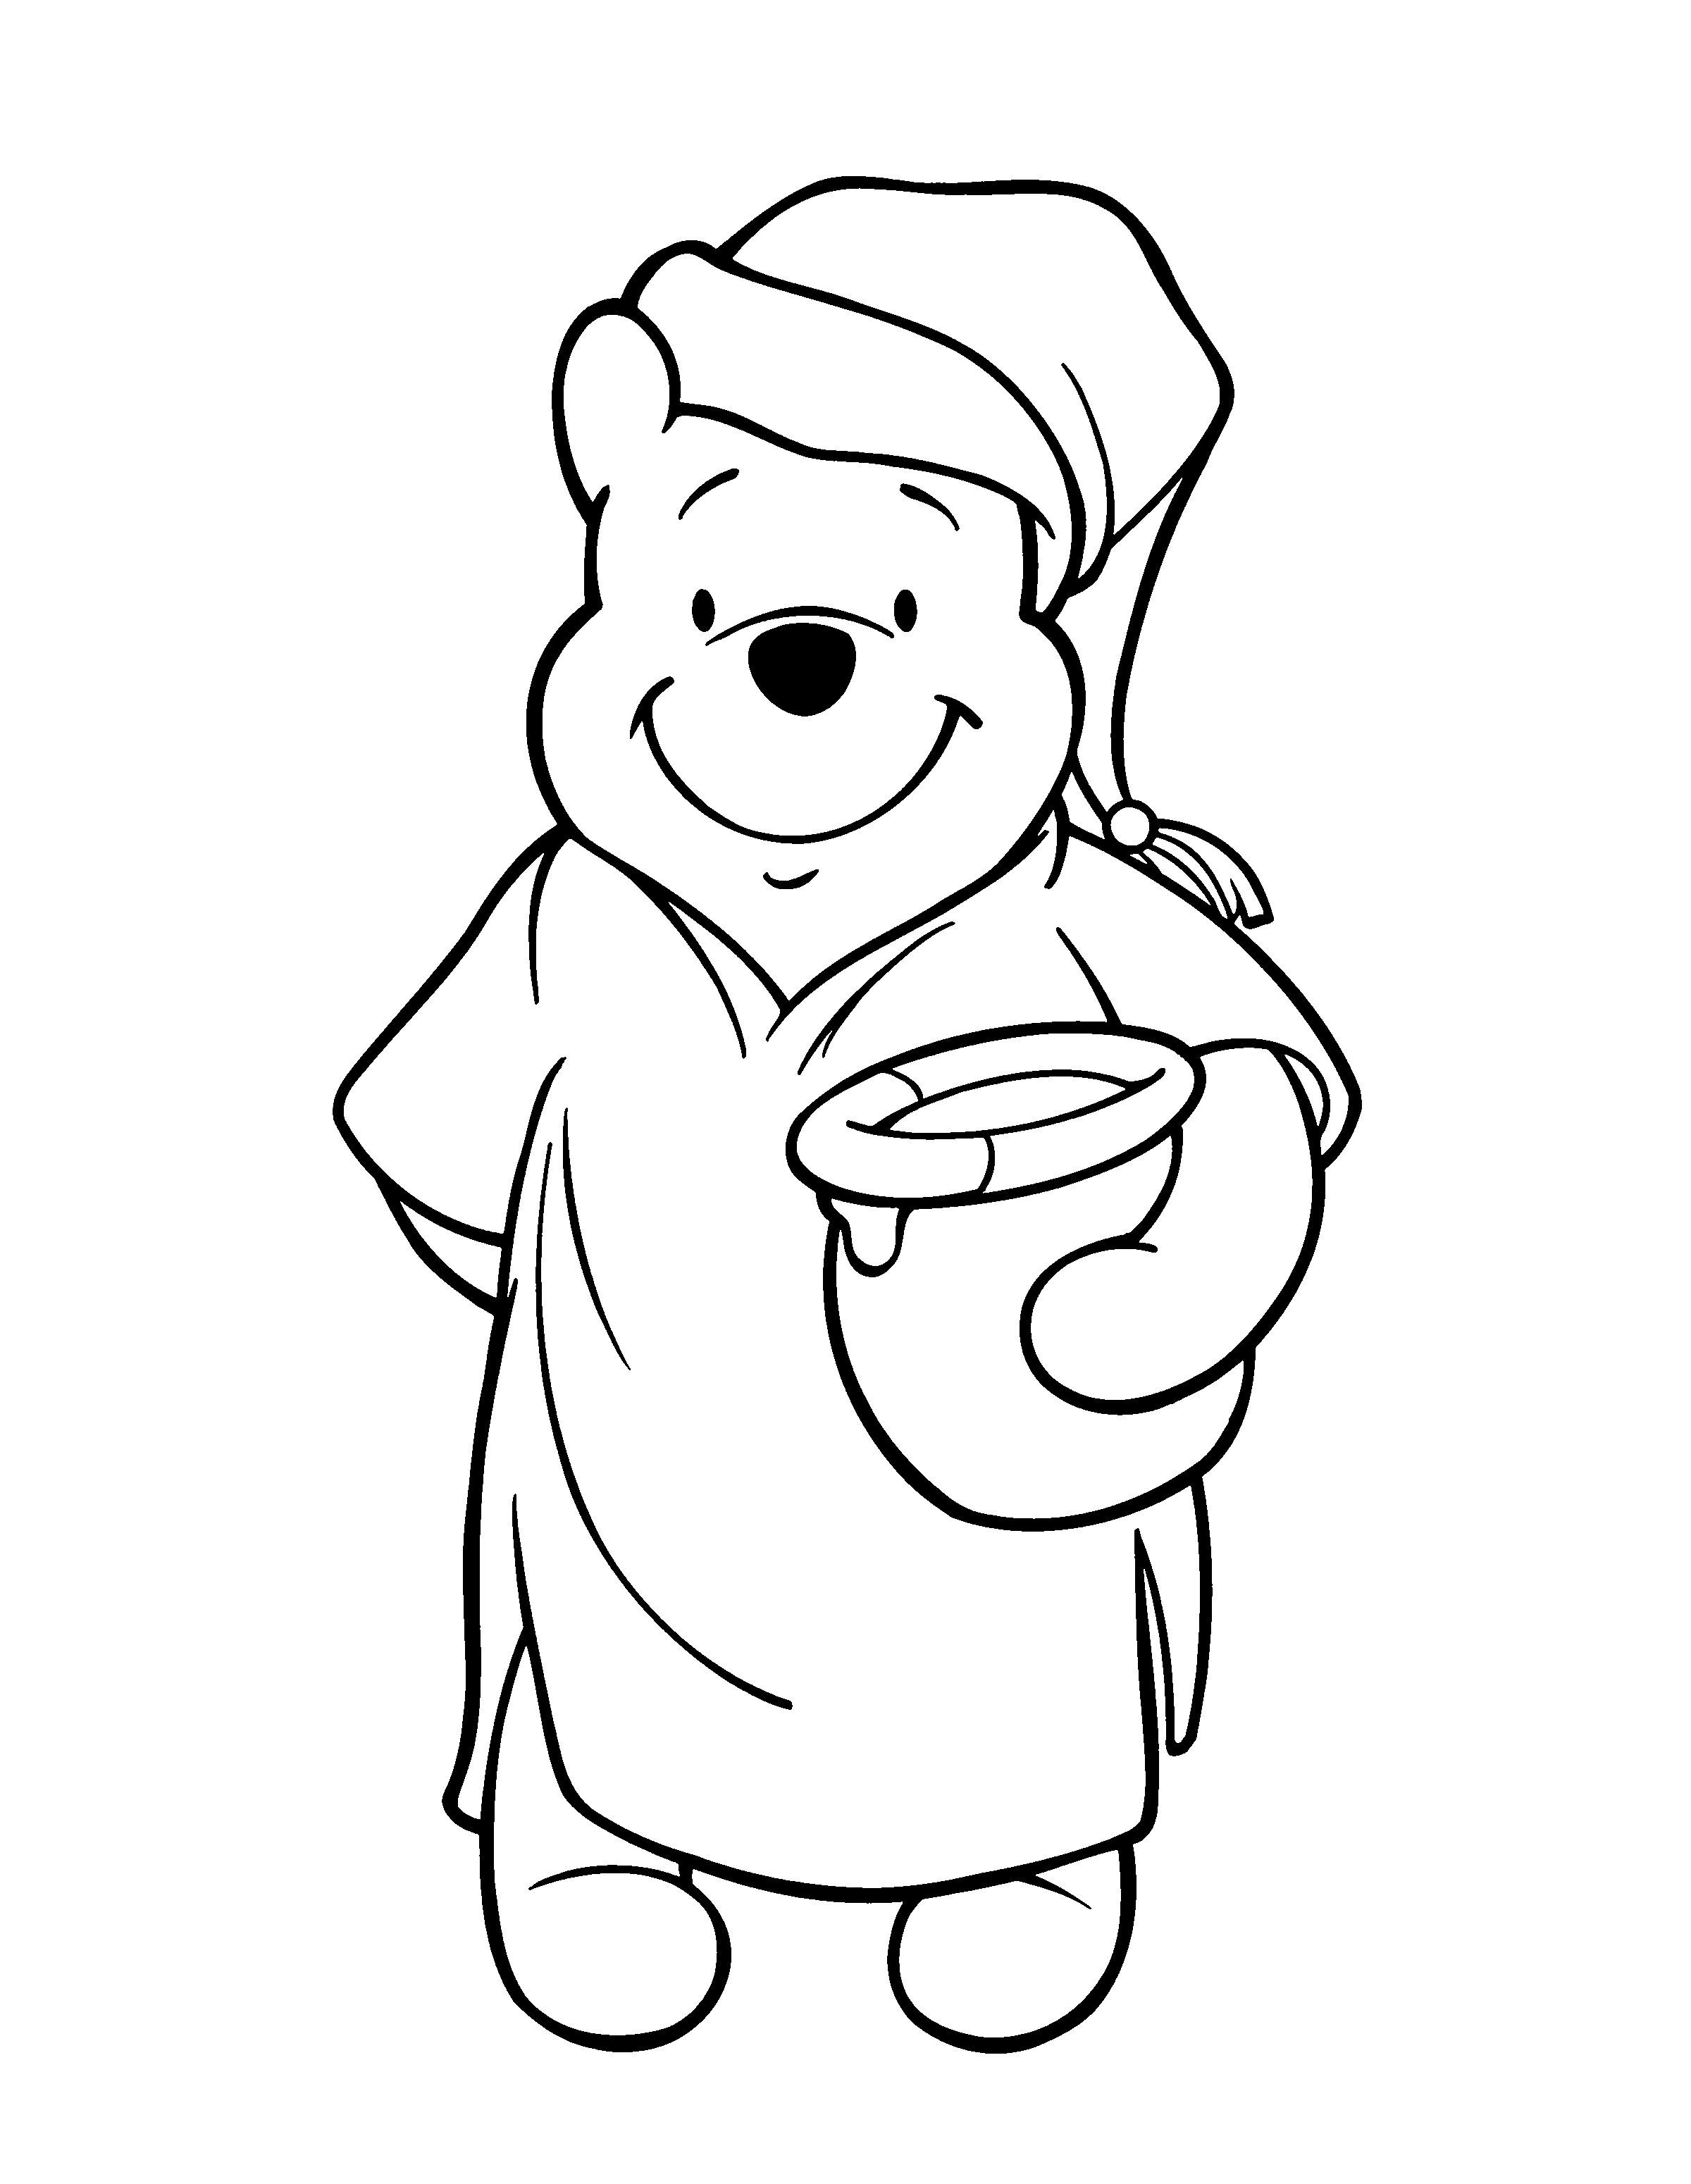 animated-coloring-pages-winnie-the-pooh-image-0038